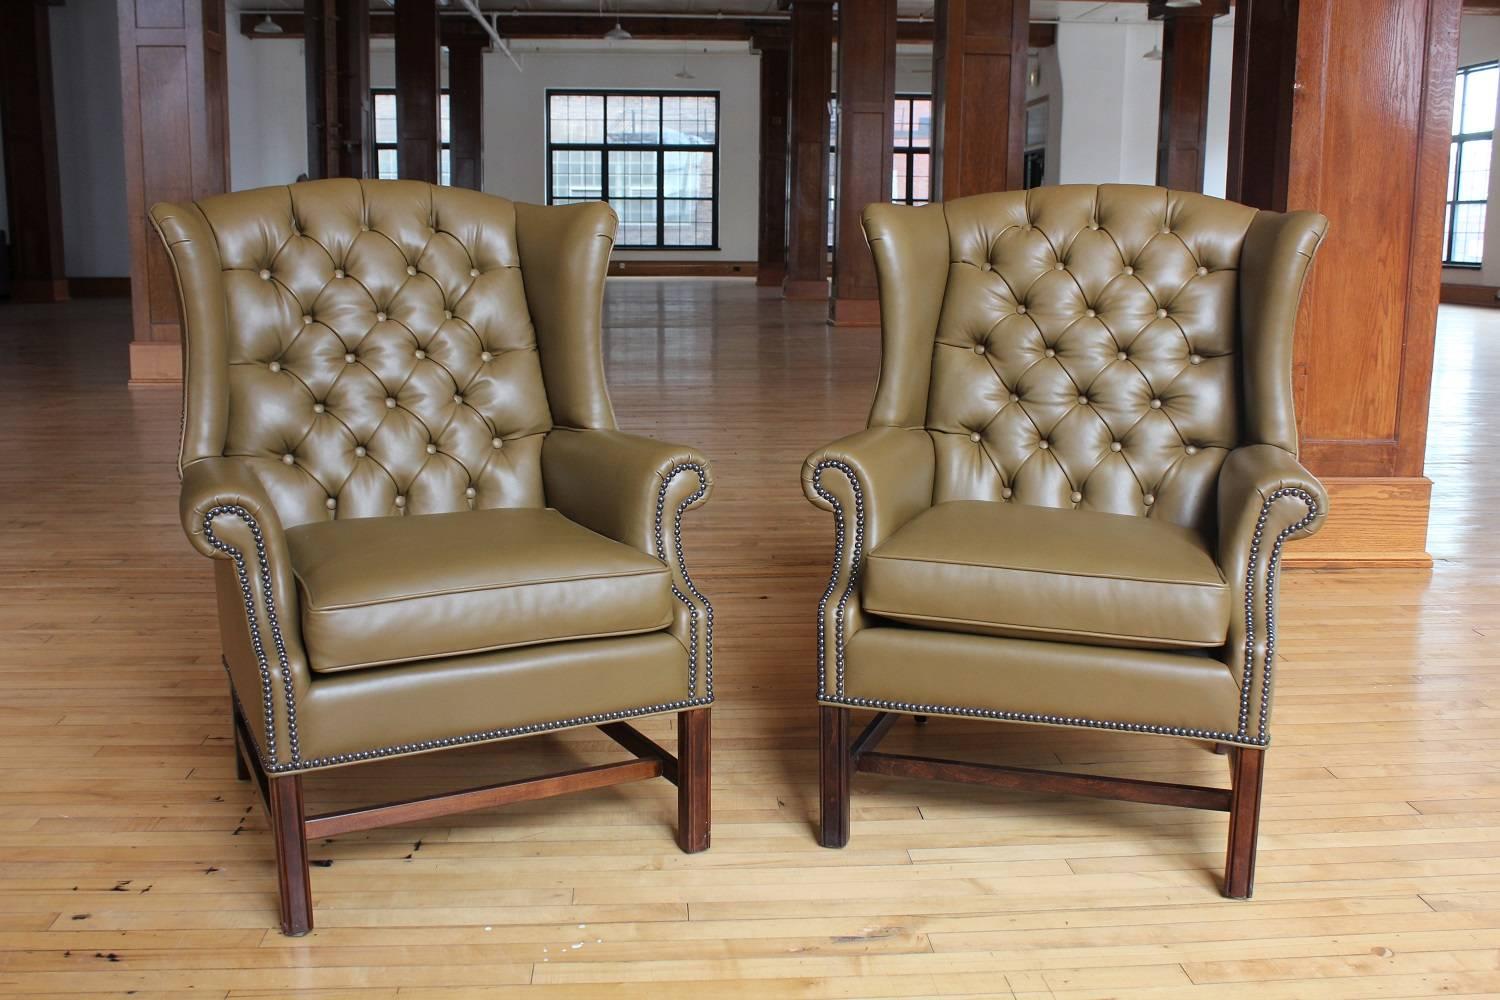 1920s American Library Tufted Leather Wing Chair. New upholstery. Listed price is for one chair.